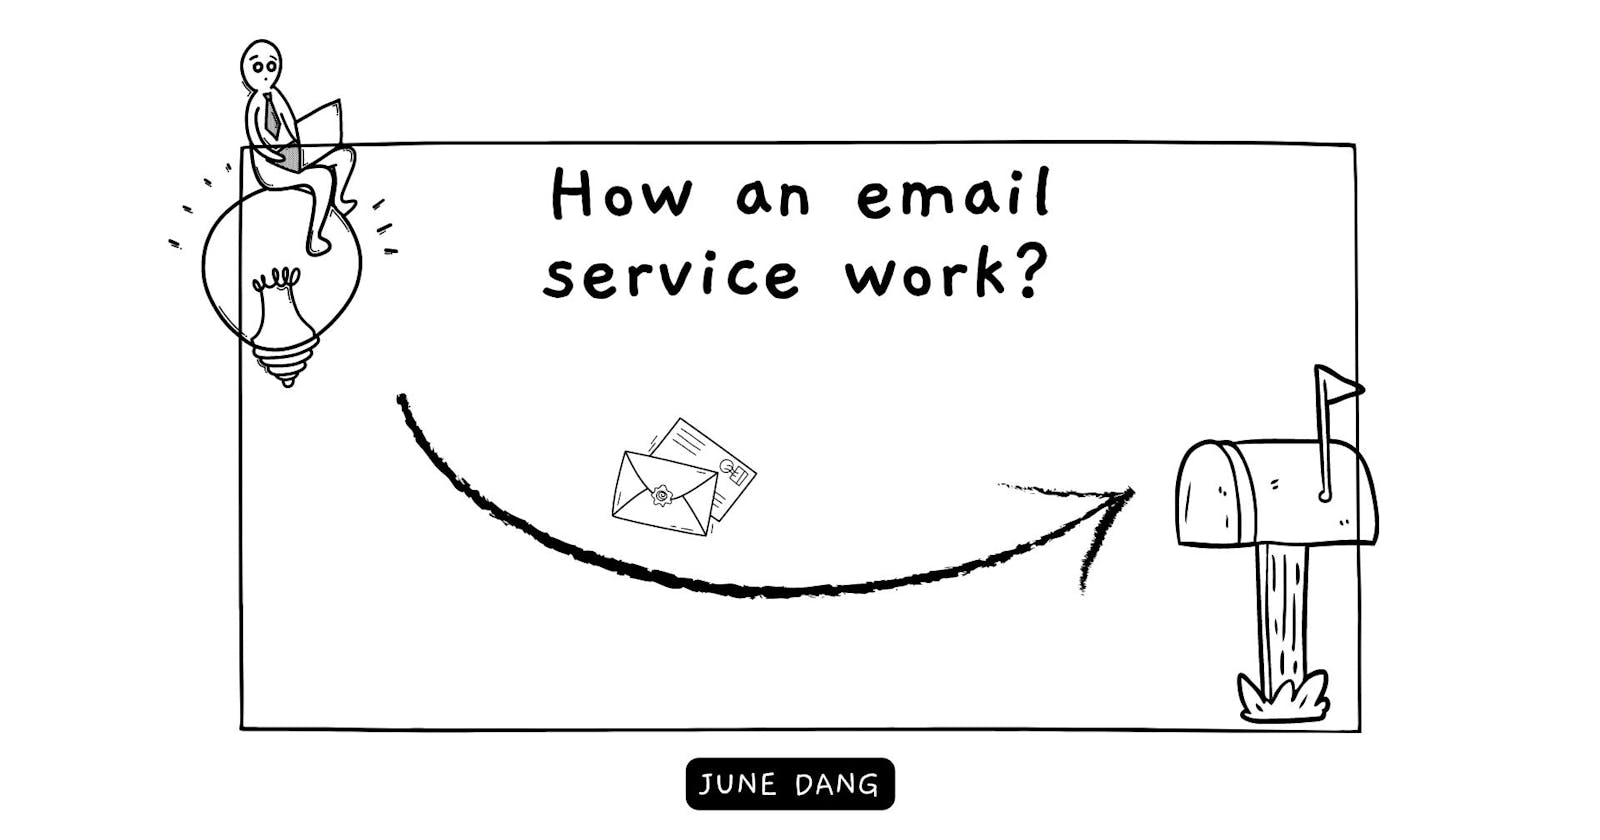 How does an e-mail service work?